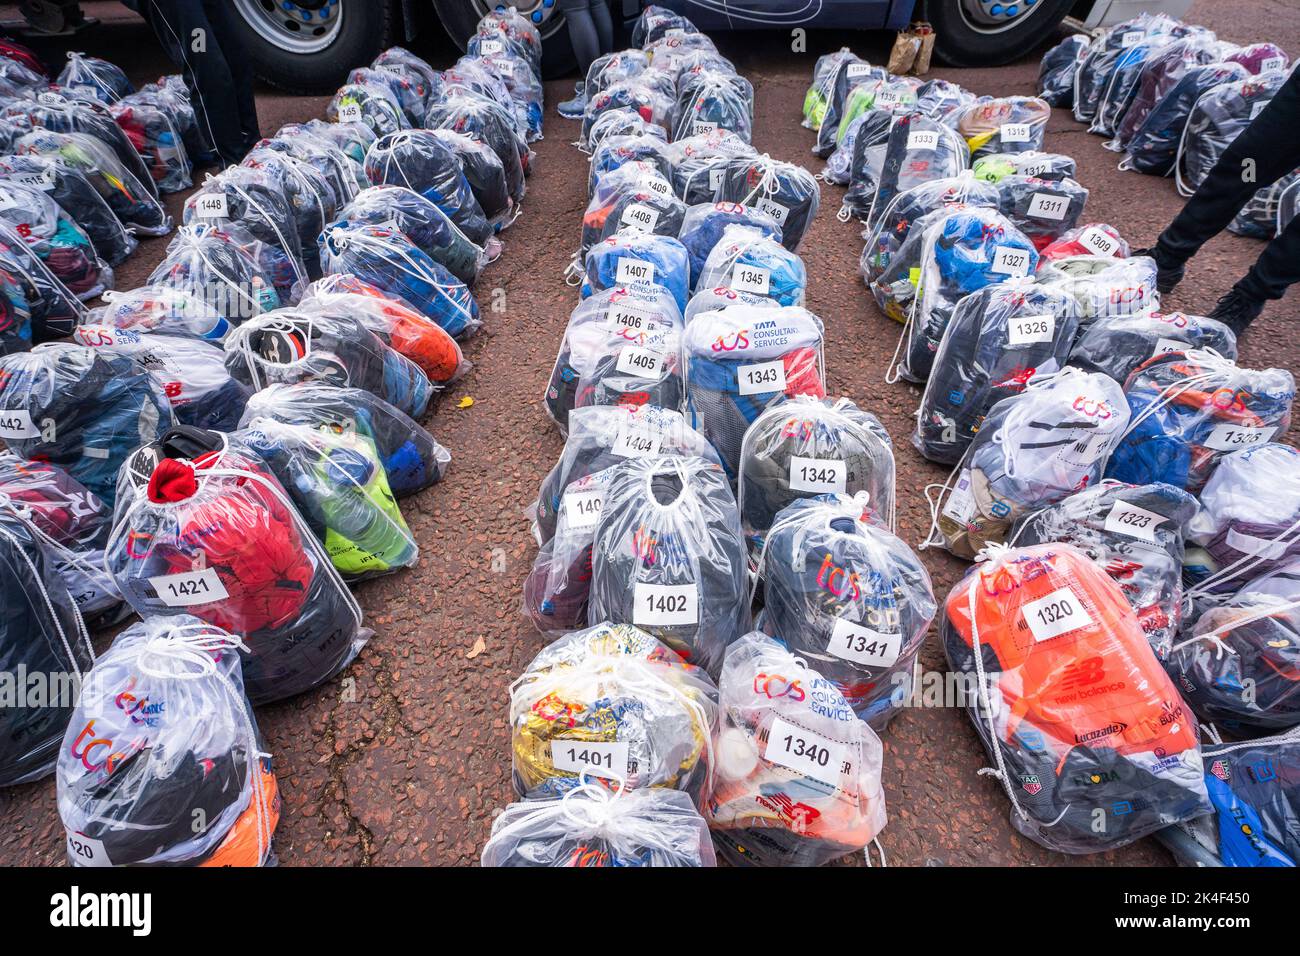 London UK. 2 October 2022 .  Thousands of baggage  belonging to marathon runners are tagged and numbered at The Mall for collection after the race  as more than  40,000 participants including elite runners took part in the London Marathon over a 26.2 mile course. than Credit: amer ghazzal/Alamy Live News. Stock Photo